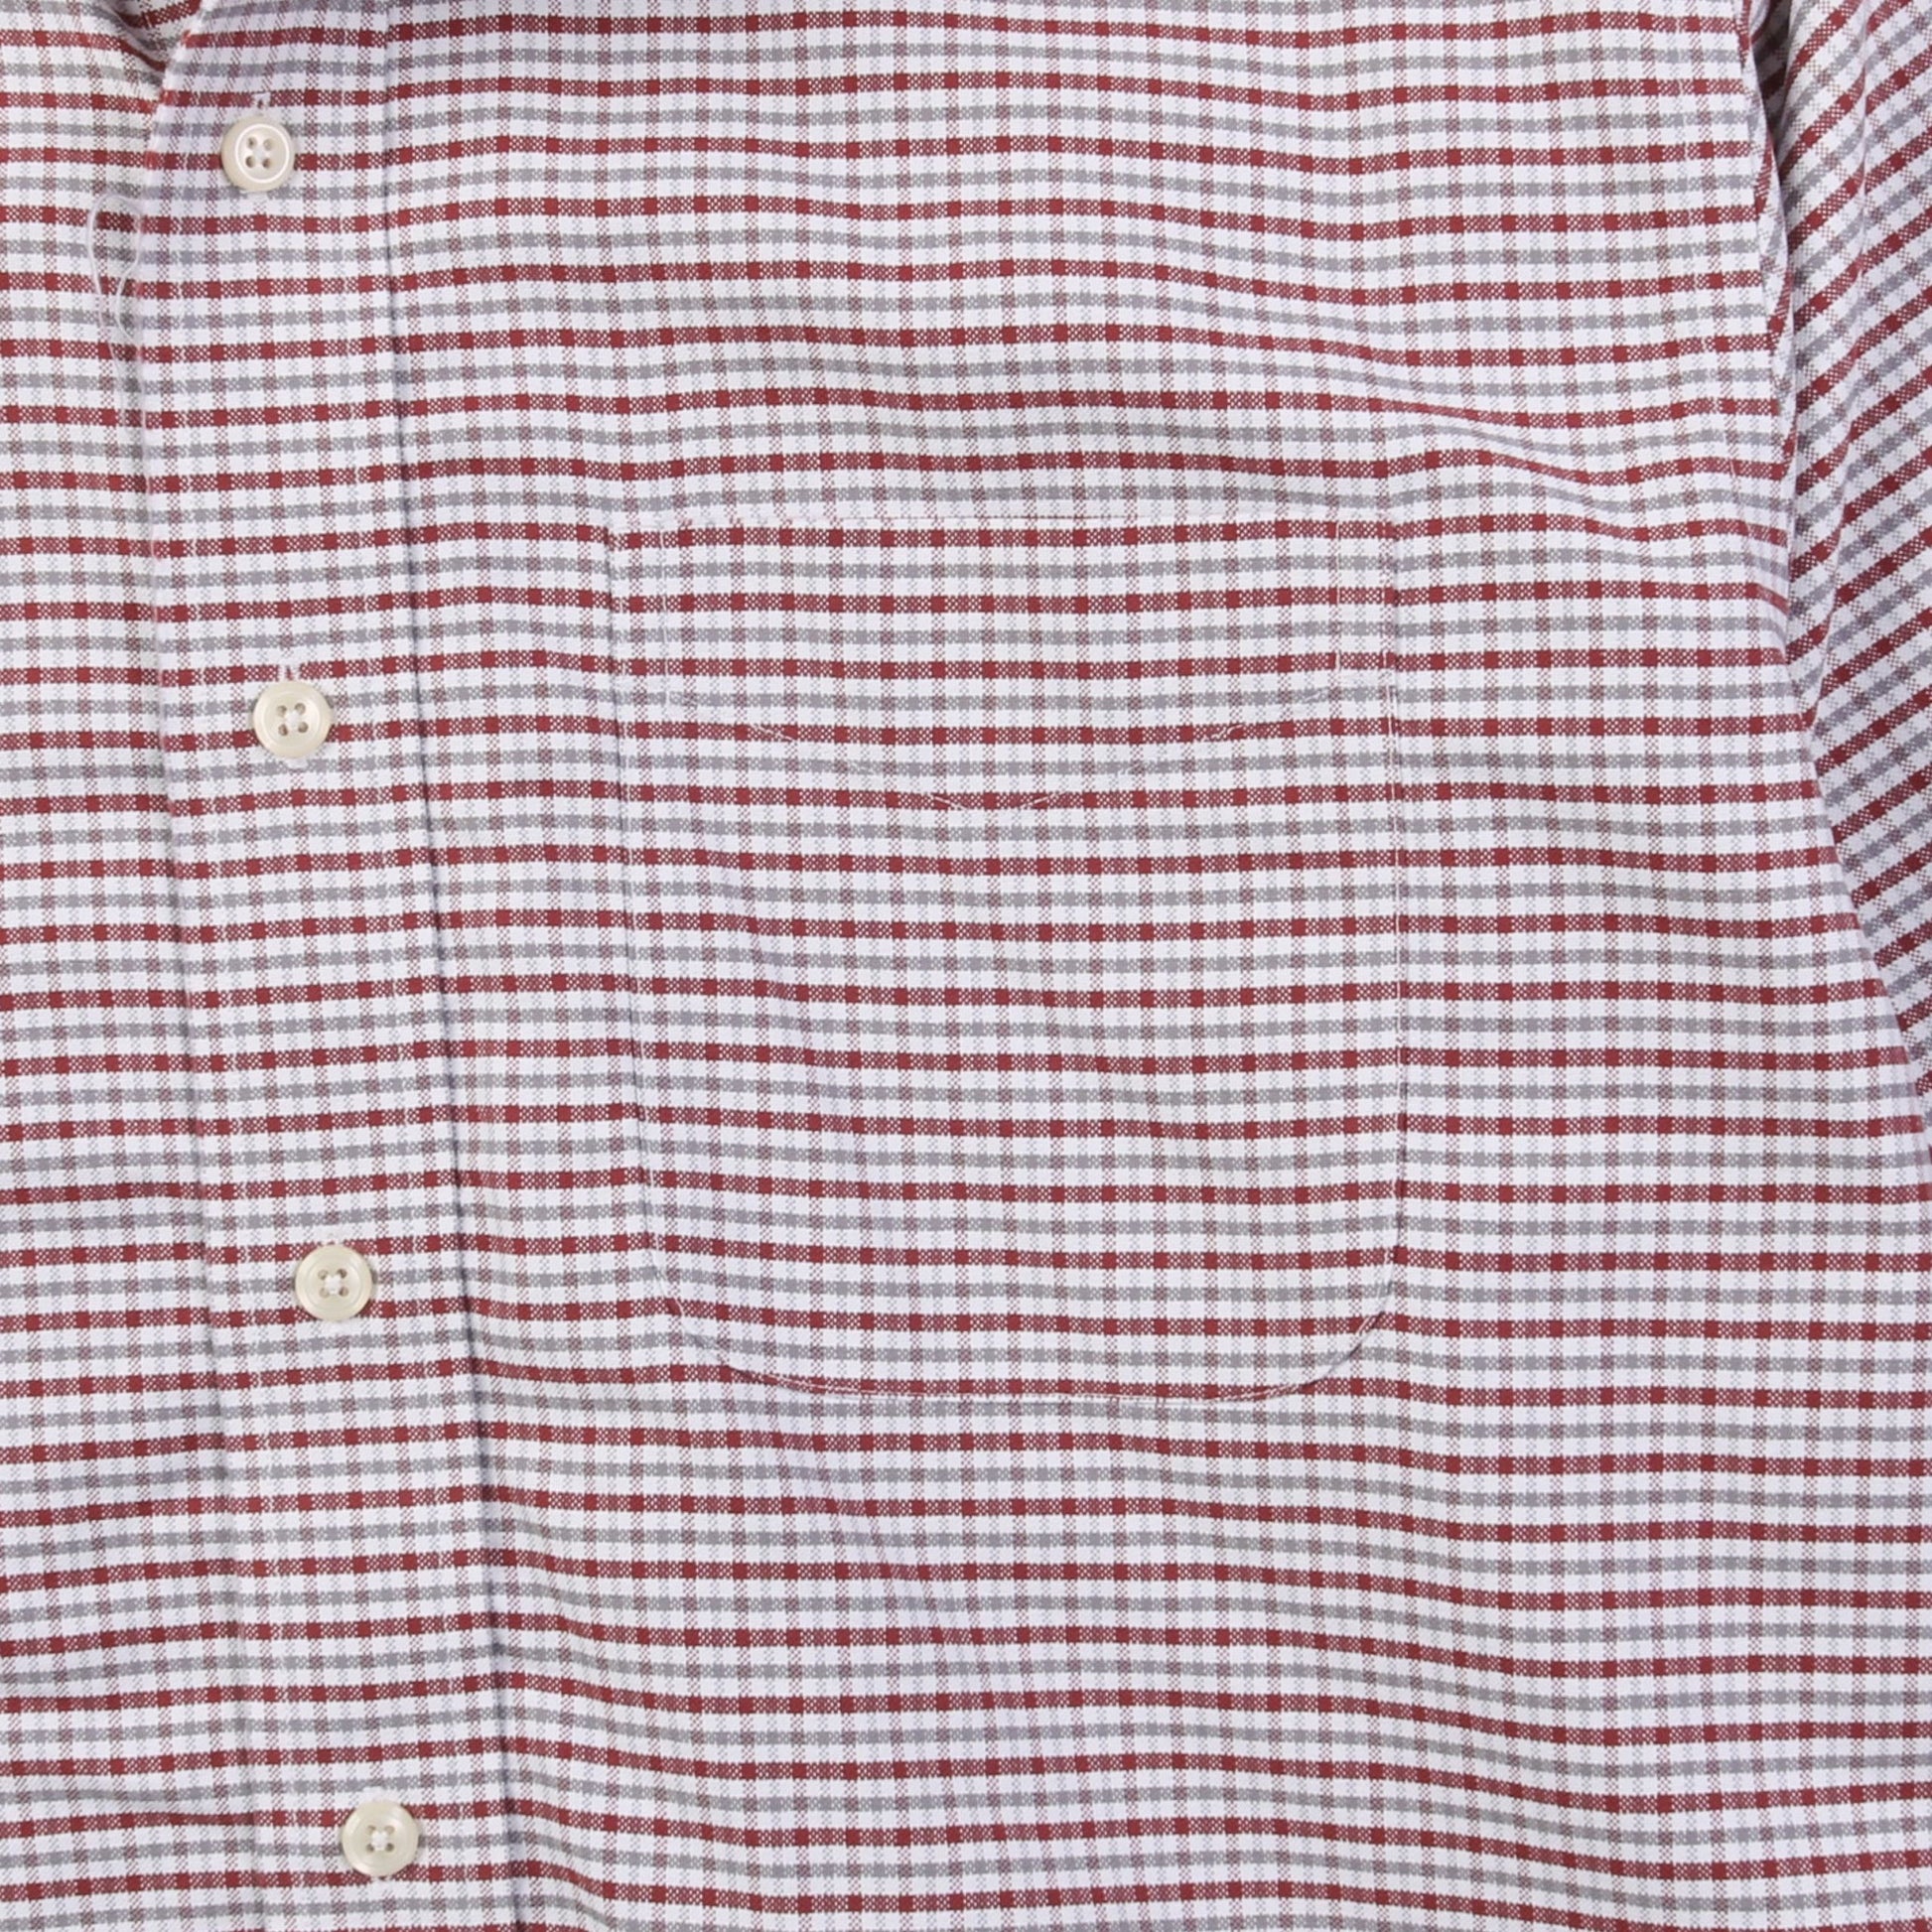 Vintage Shirt - Red Micro Check - American Madness